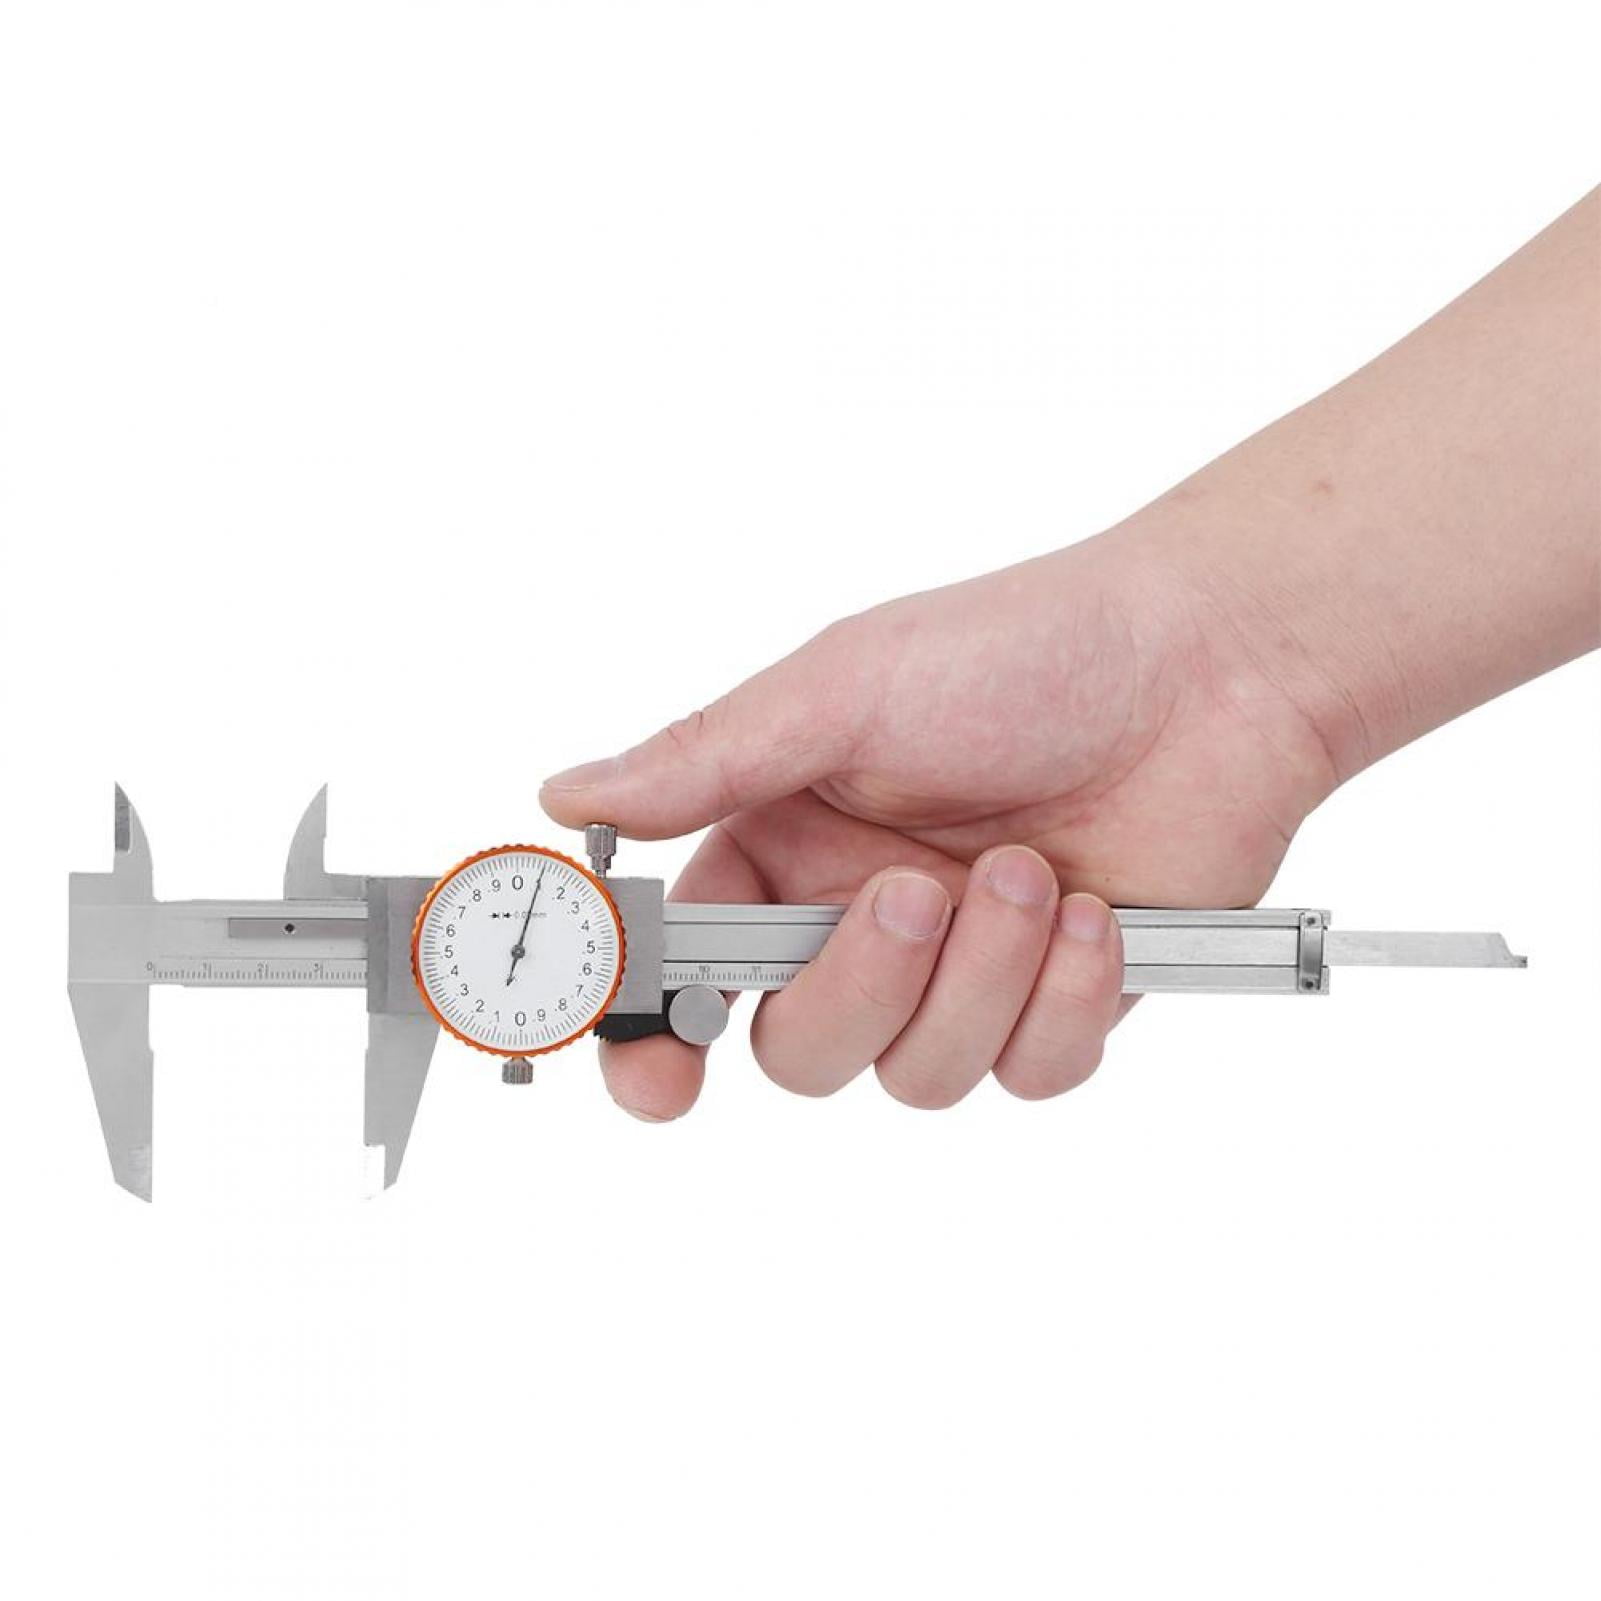 Aluminum Alloy With Dial for Buliding Home Industry Agriculture Shockproof 0-150mm Measuring Tool Adjustable Caliper 